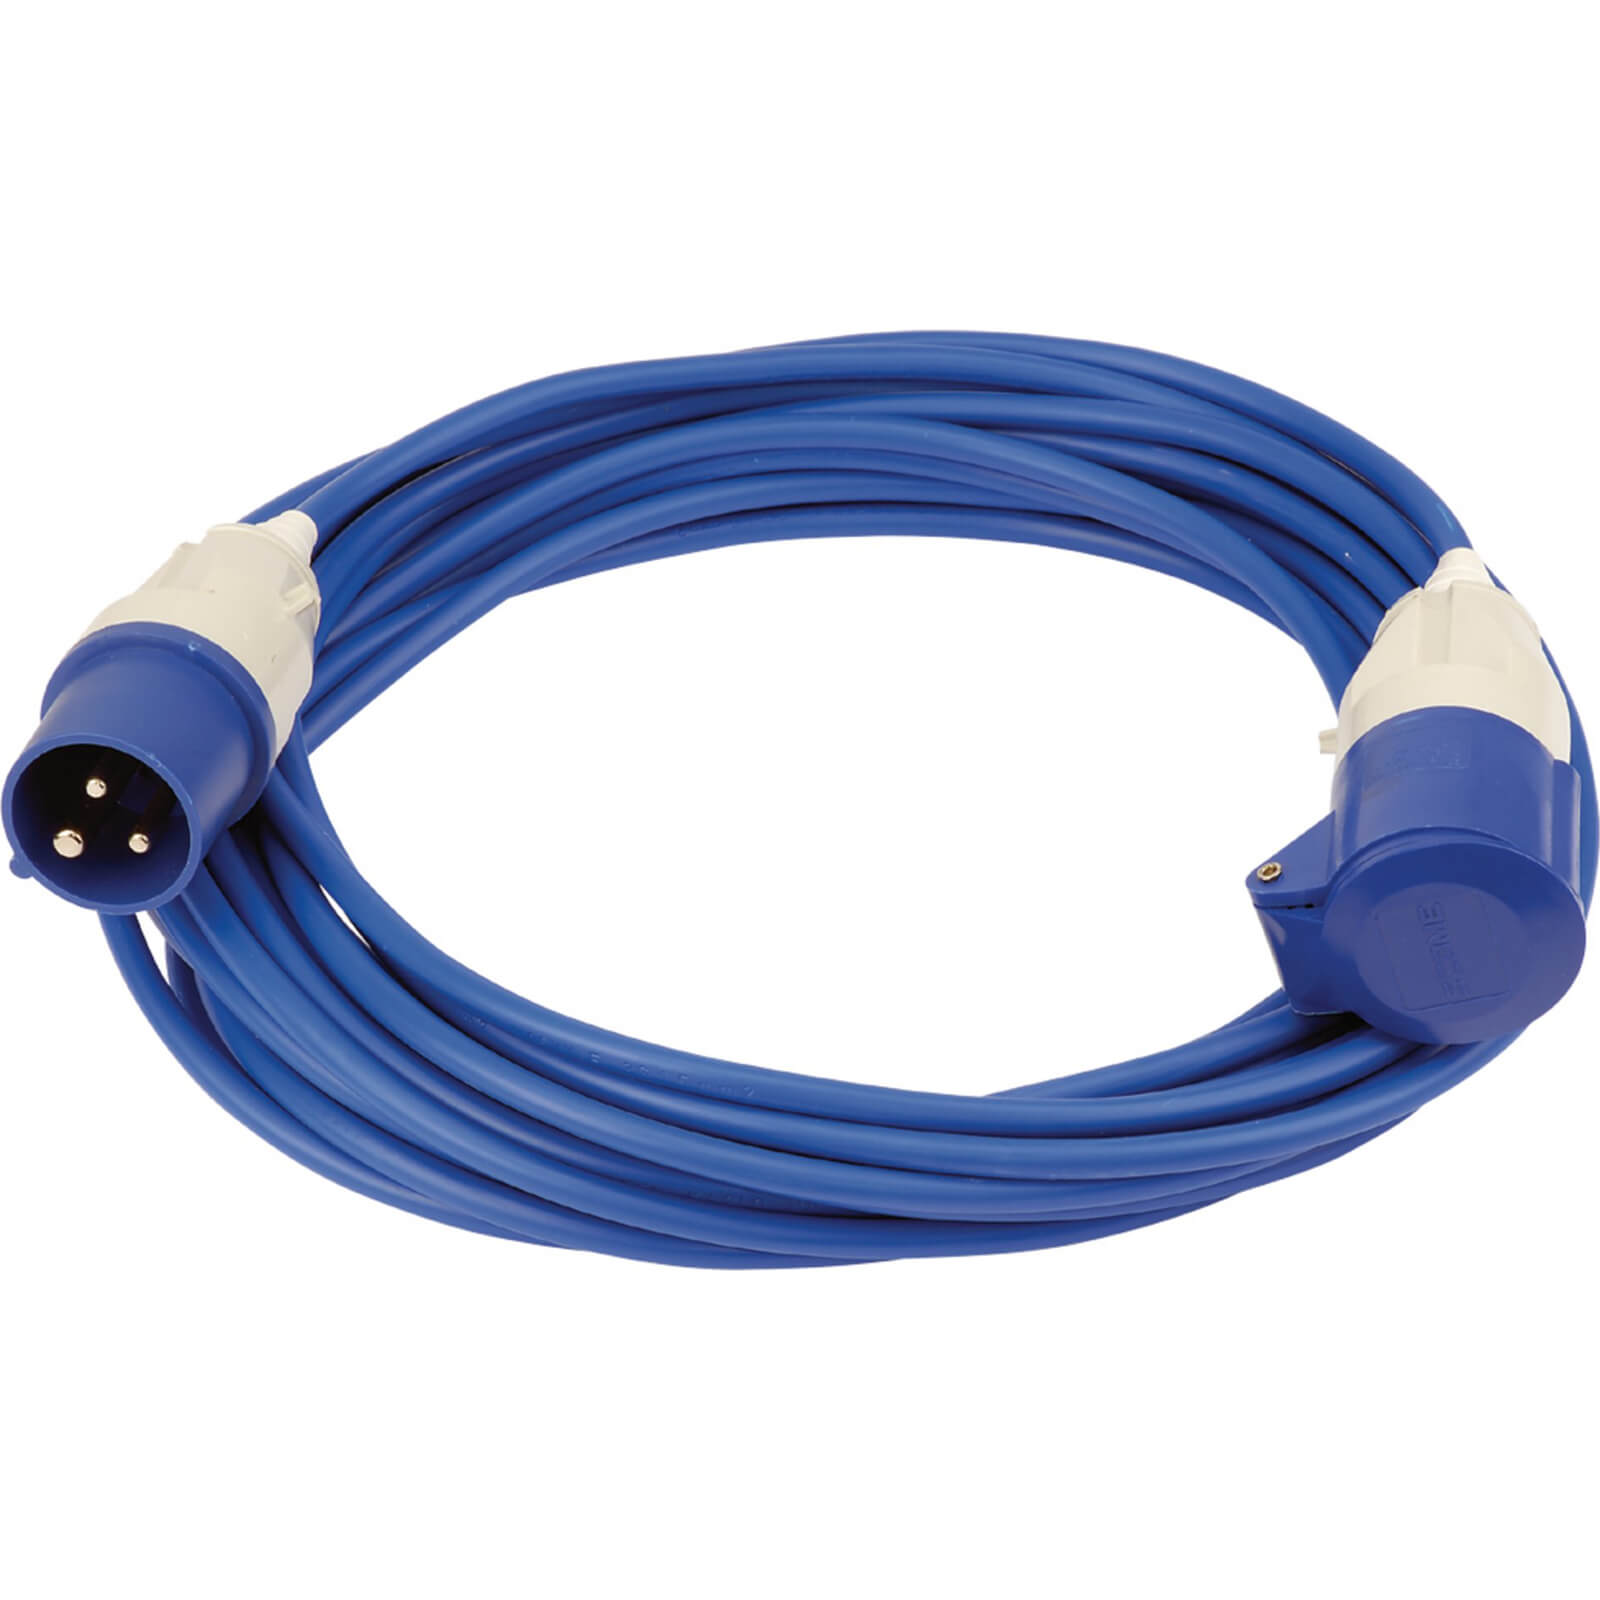 Image of Draper Extension Trailing Lead 16 amp Blue Cable 240v 14m